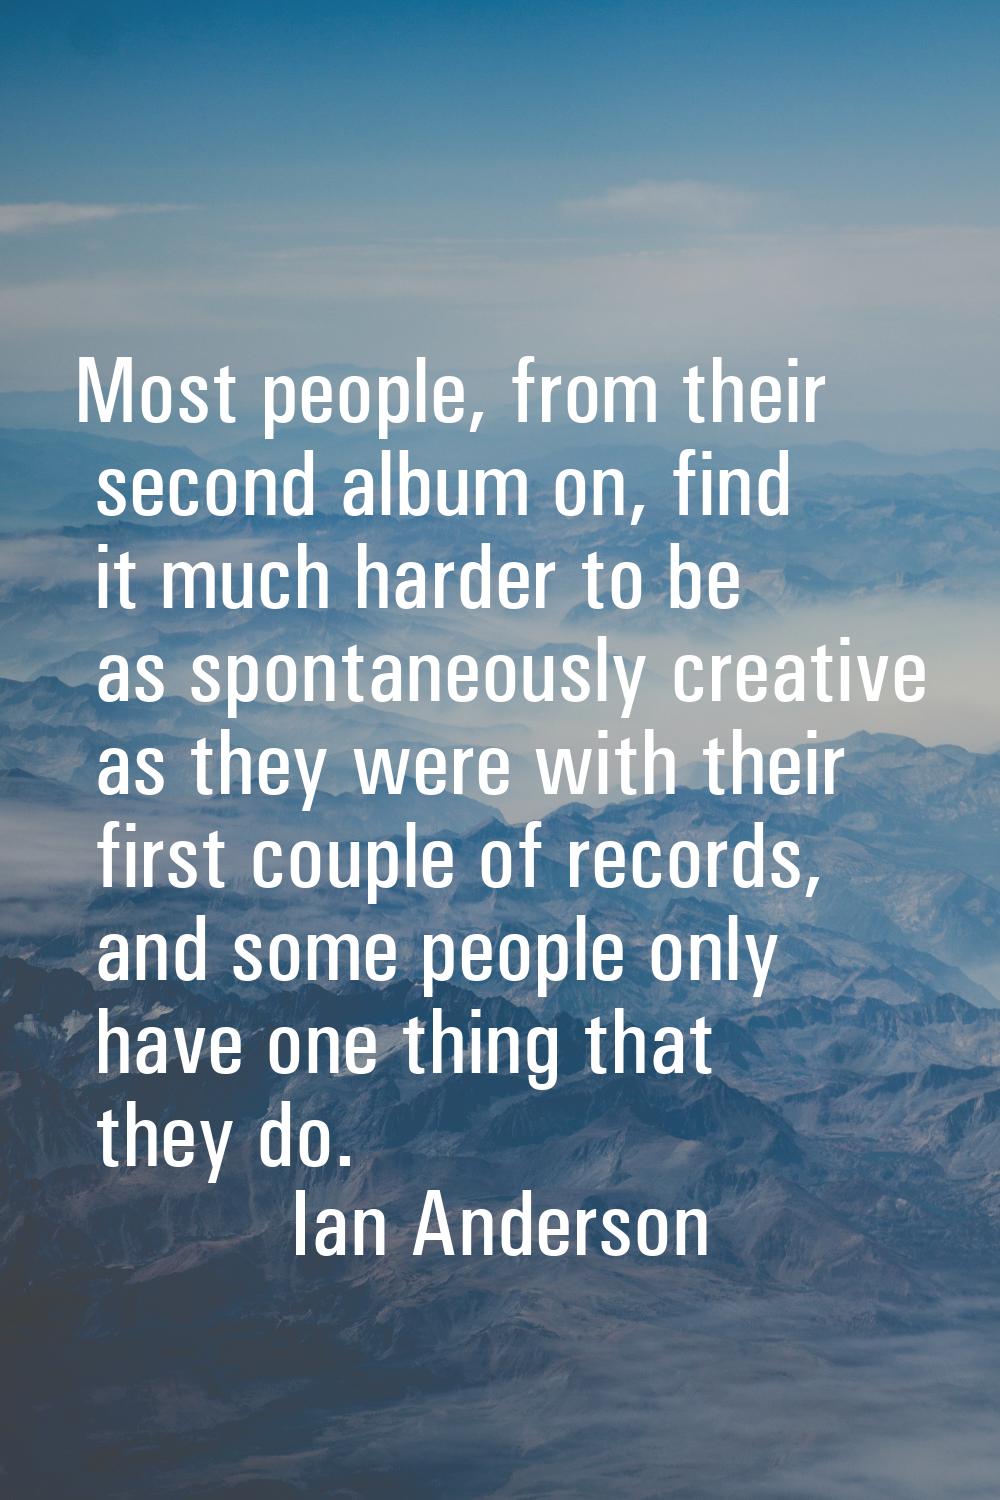 Most people, from their second album on, find it much harder to be as spontaneously creative as the